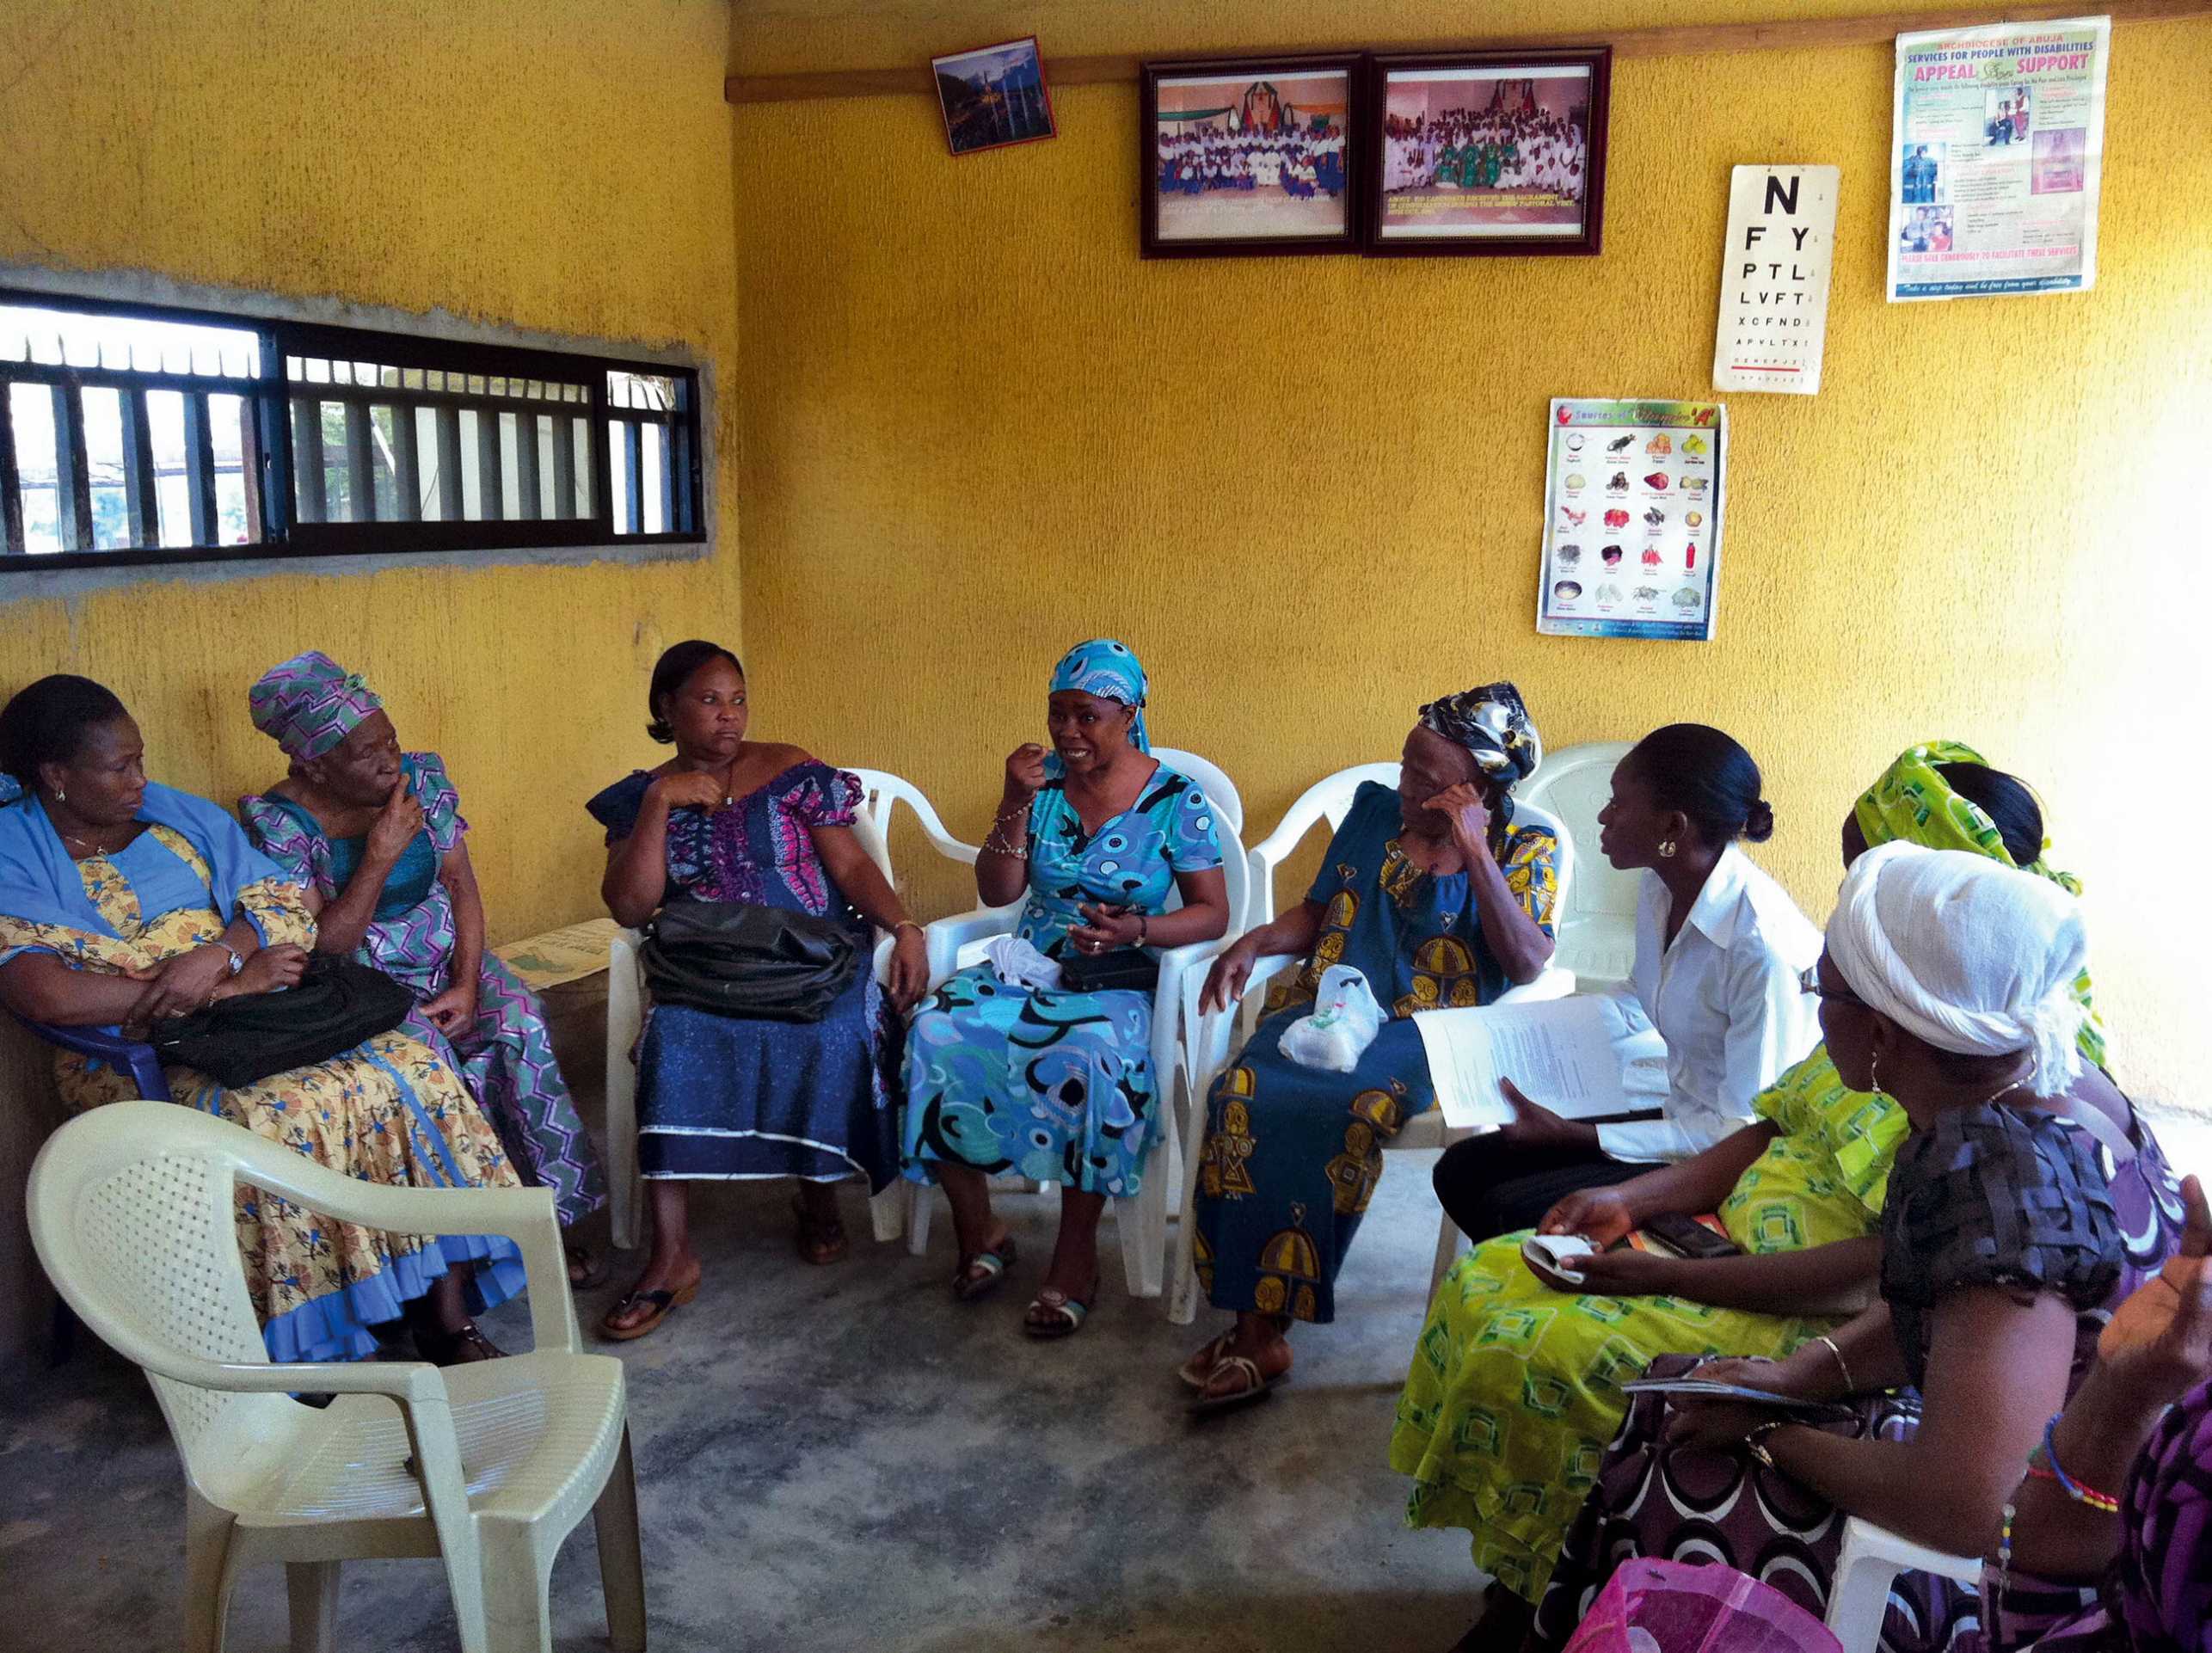 Focus group discussion about glaucoma, Nigeria.